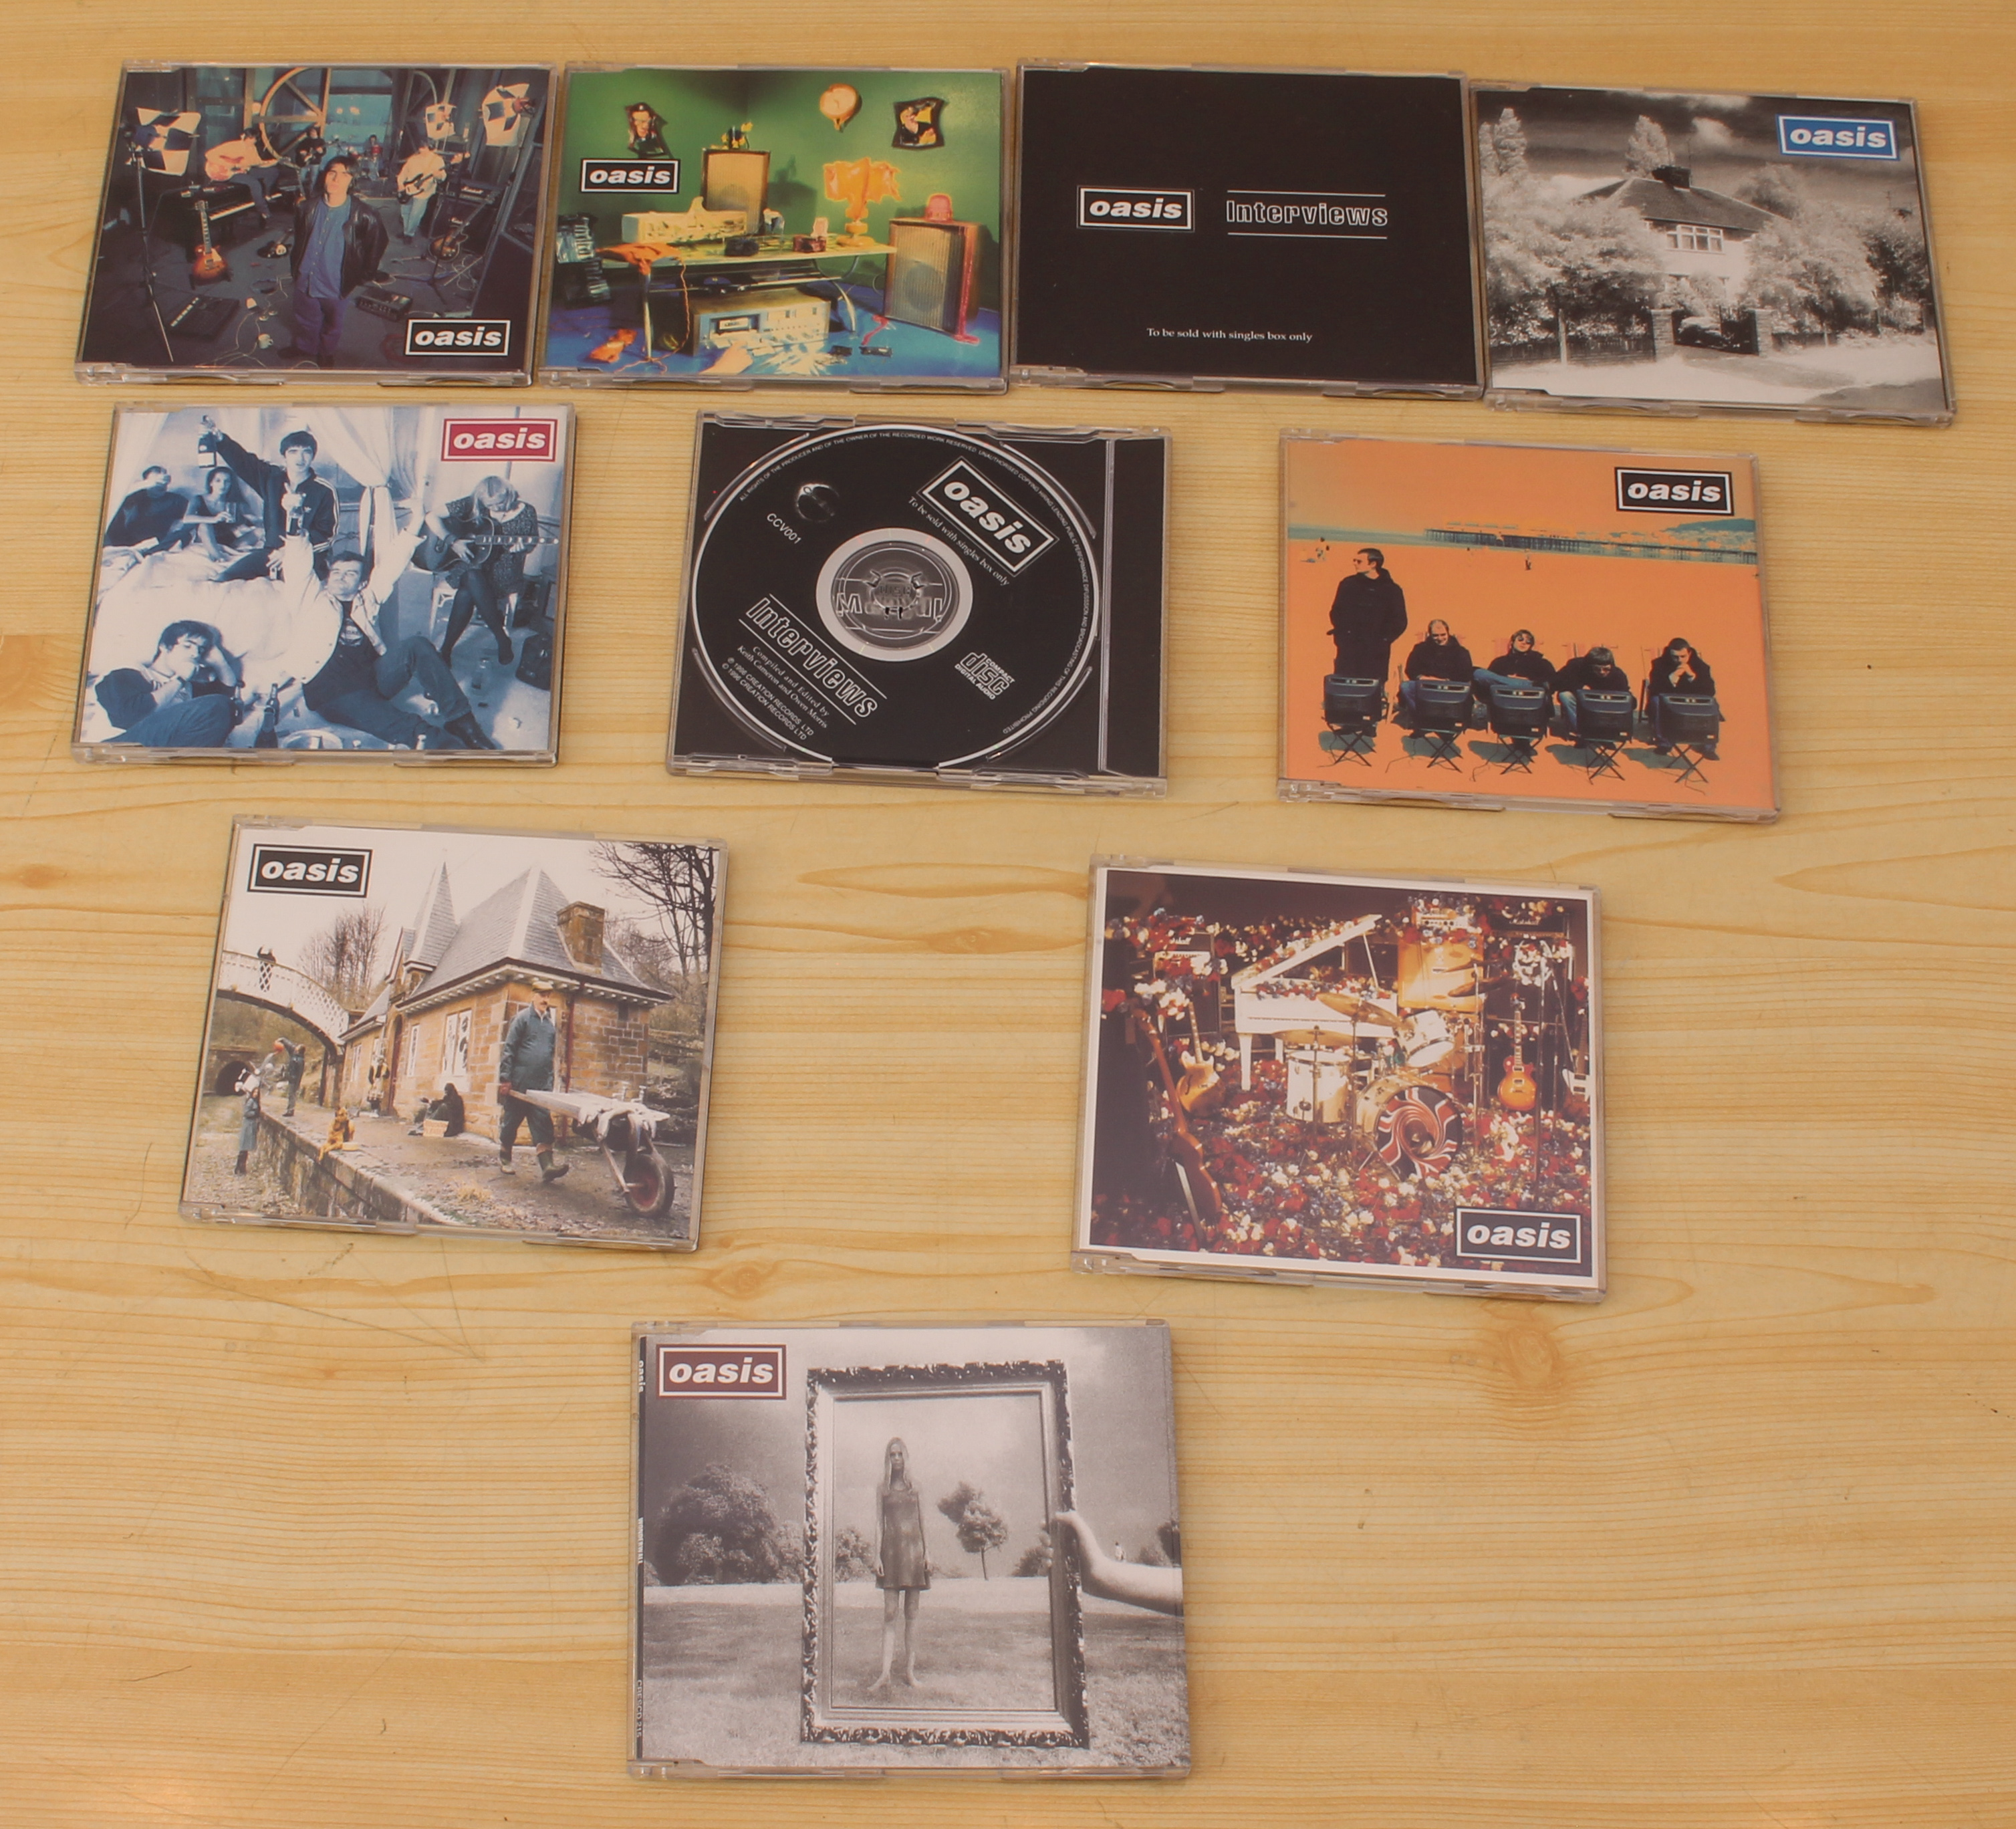 Two Oasis CD singles box sets to include: Definitely Maybe (5 CD singles box set with booklet - Image 3 of 4